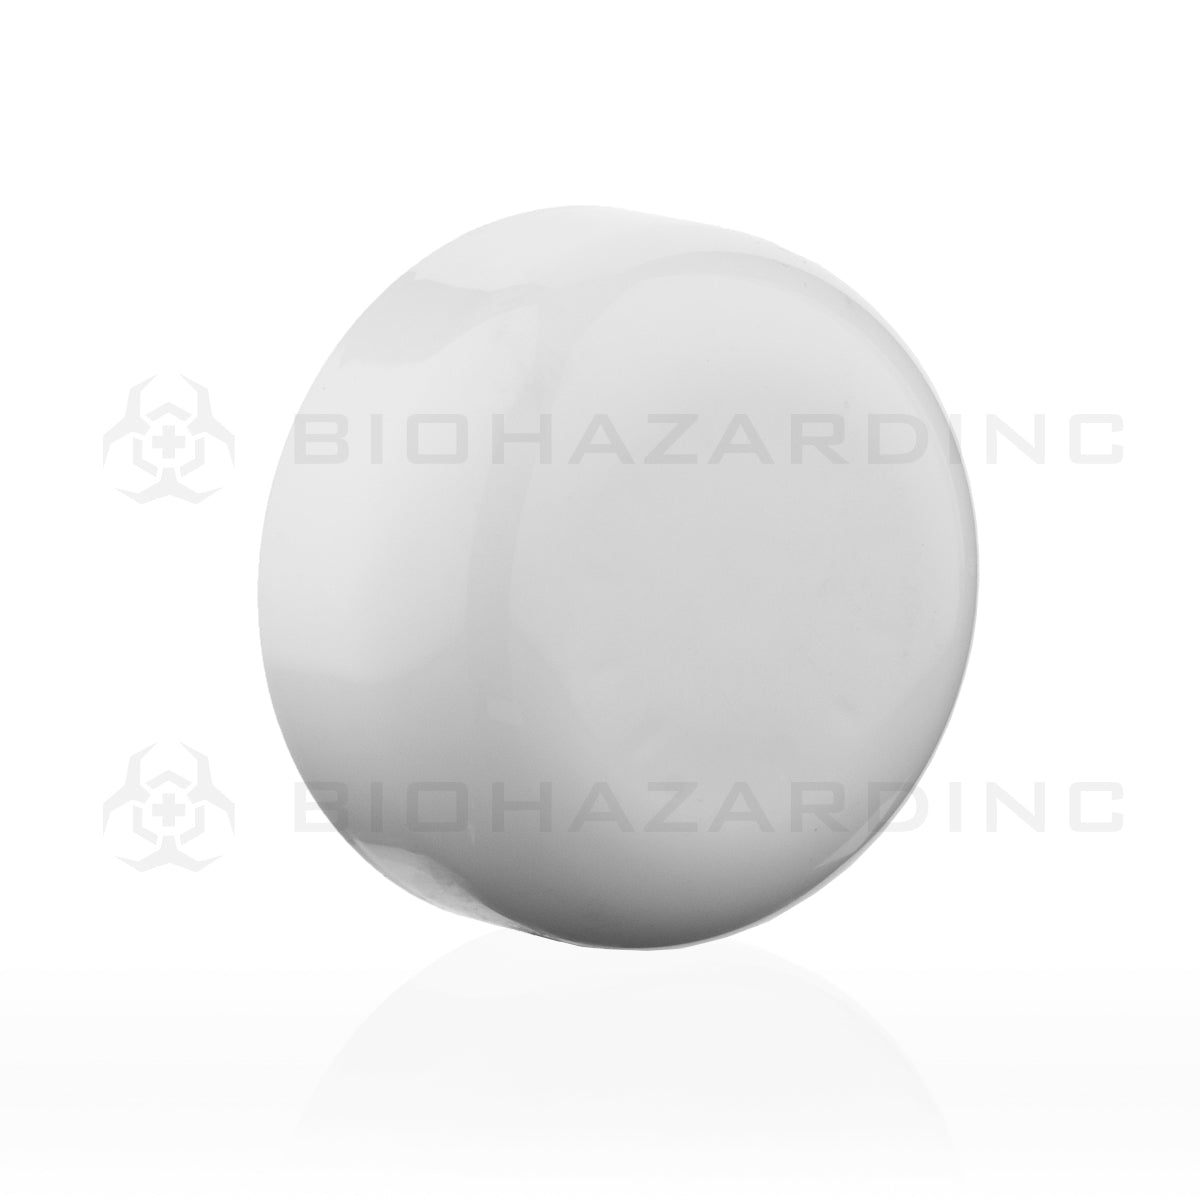 Child Resistant | Dome Push Down & Turn Plastic Caps w/ Liner | 53mm - Gloss White - 120 Count Child Resistant Cap Biohazard Inc   